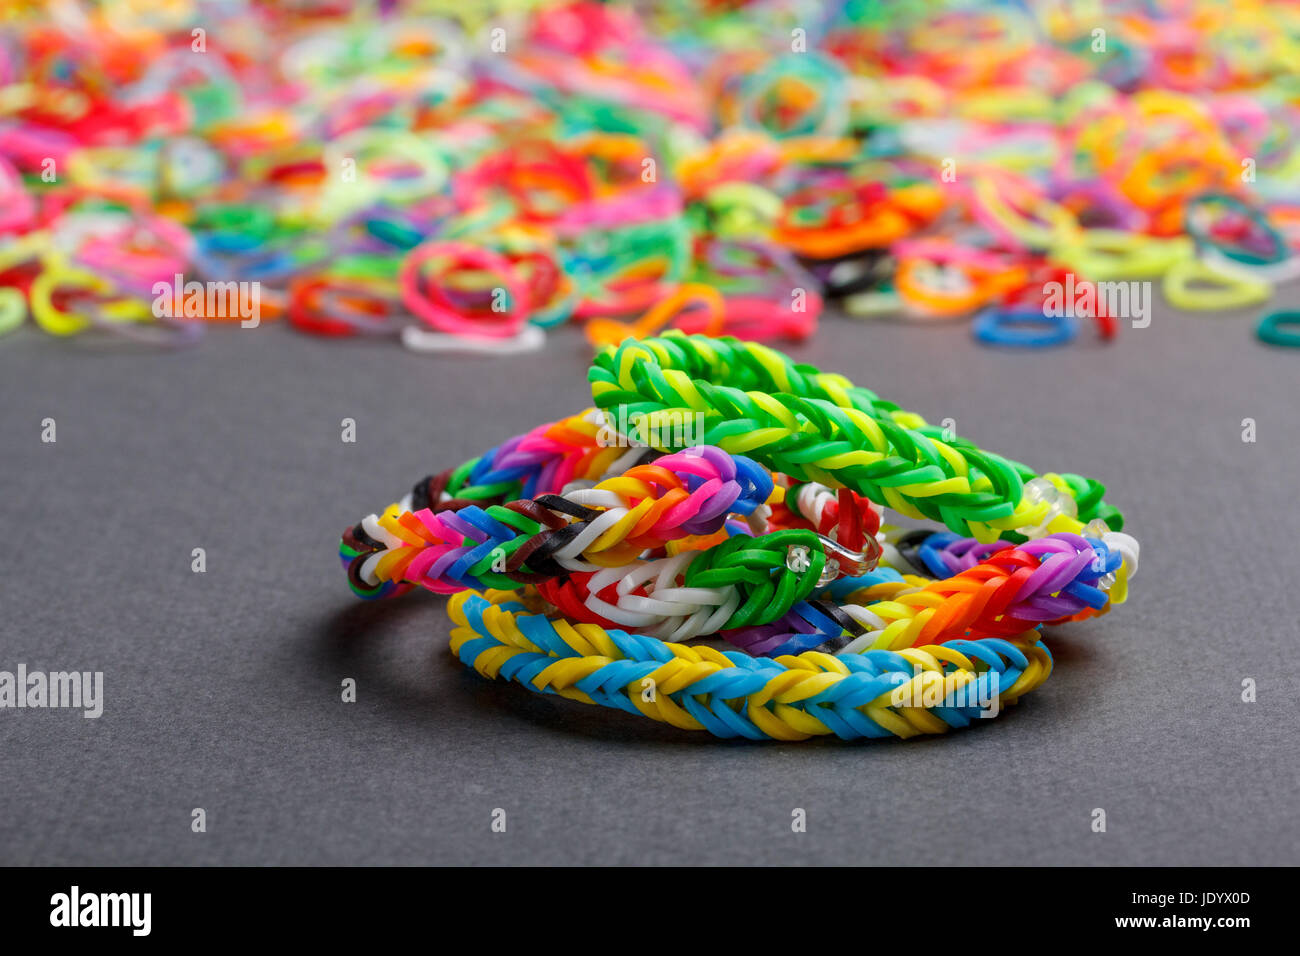 Colorful Rainbow Loom Bracelet Rubber Bands In A Box Stock Photo